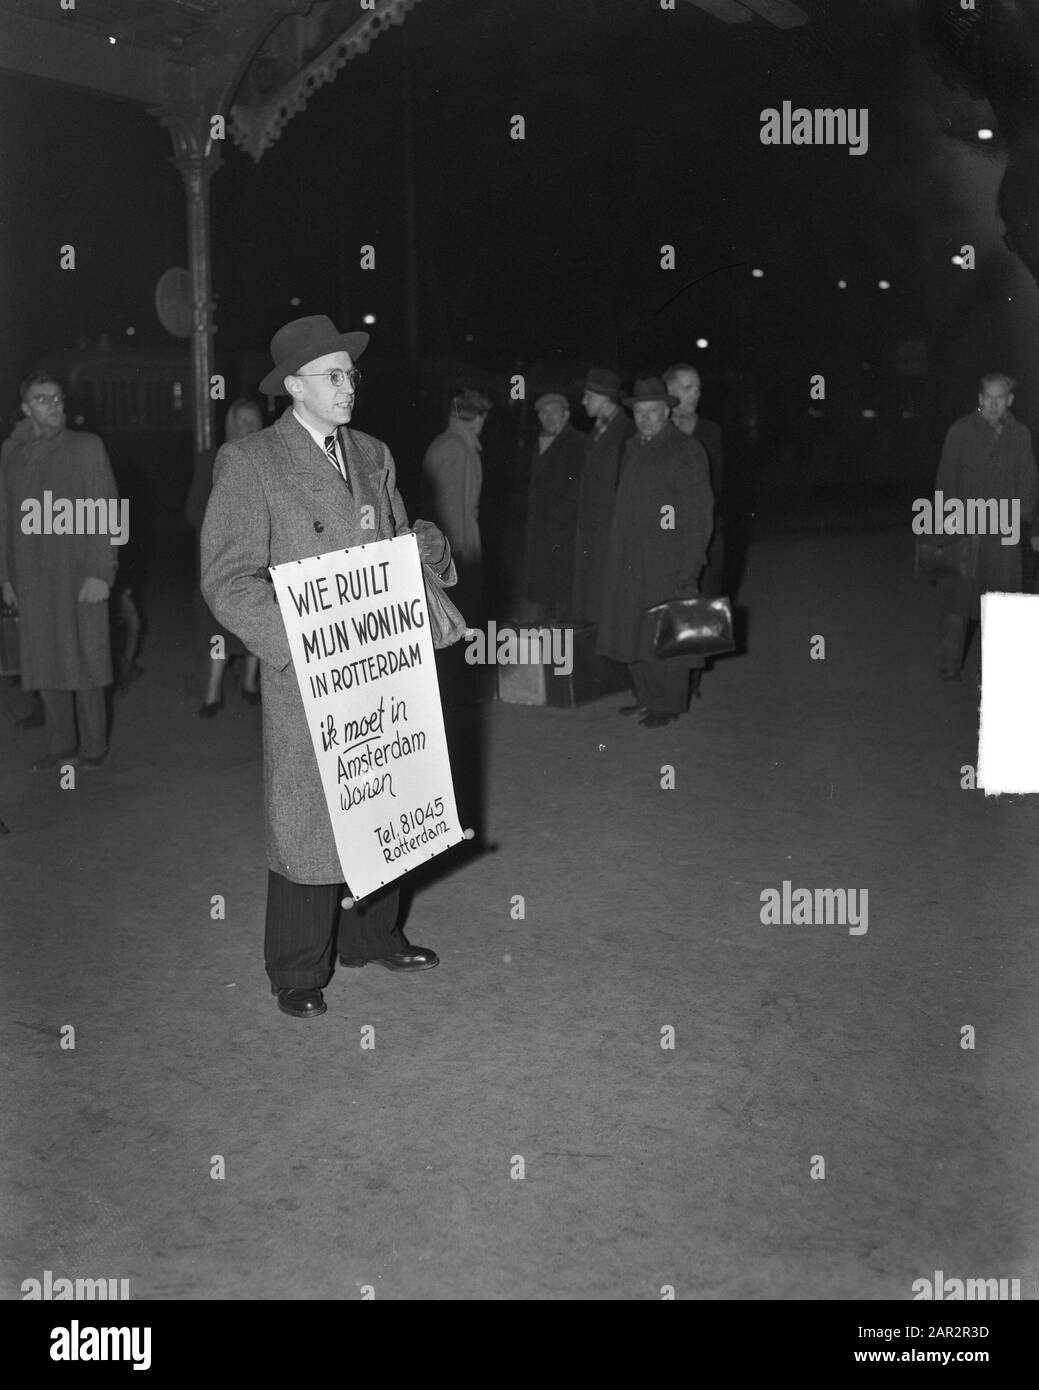 Who finds my home? man with sign looking for living space in Amsterdam Date: 20 January 1950 Location: Amsterdam Keywords: housing shortage Stock Photo